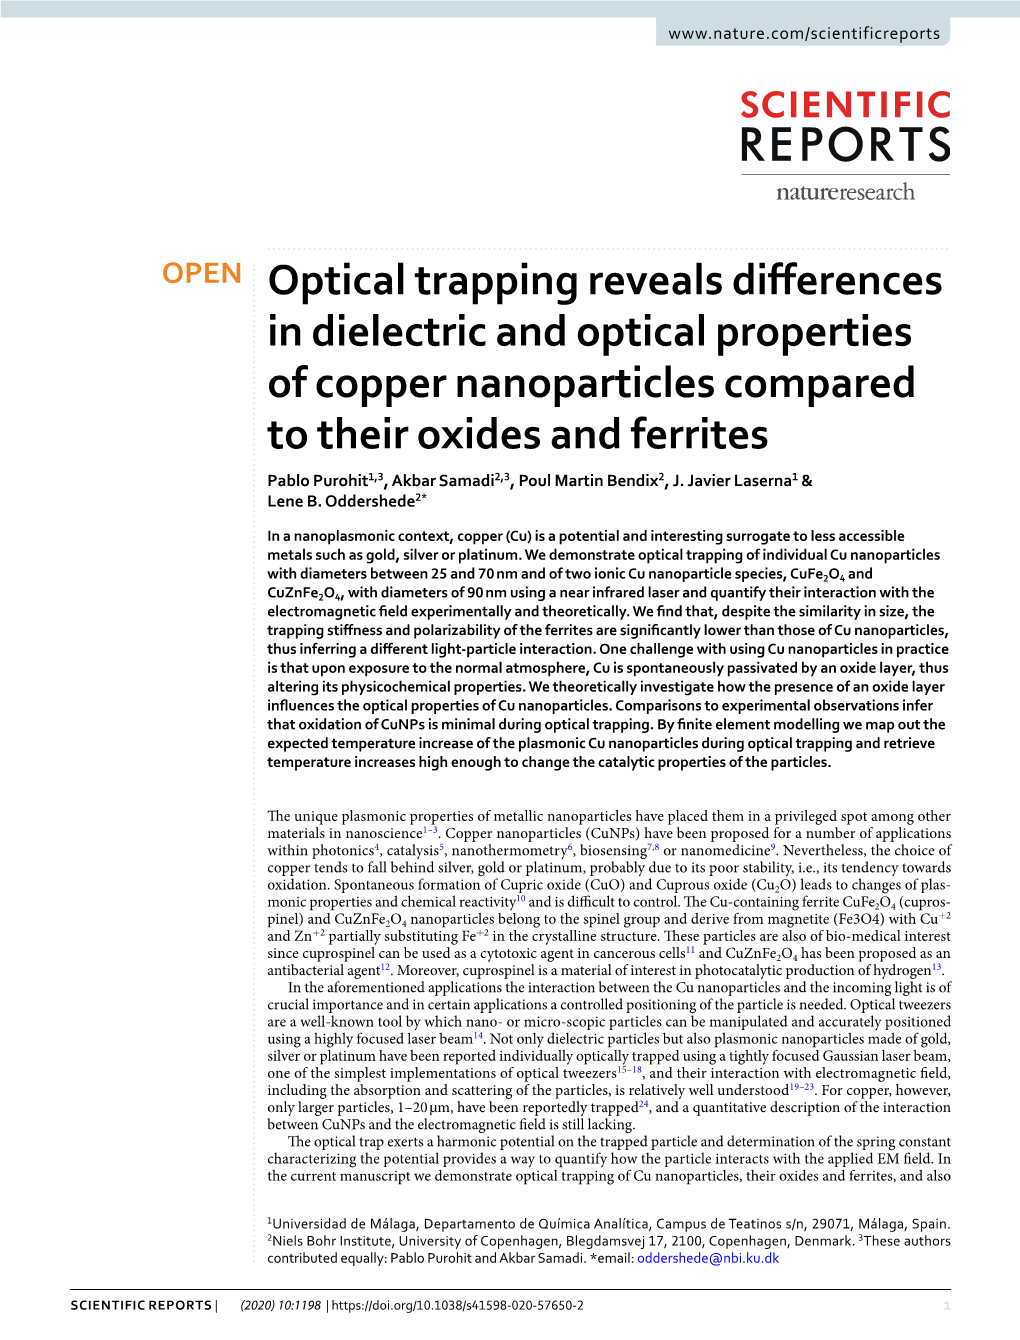 Optical Trapping Reveals Differences in Dielectric and Optical Properties Of